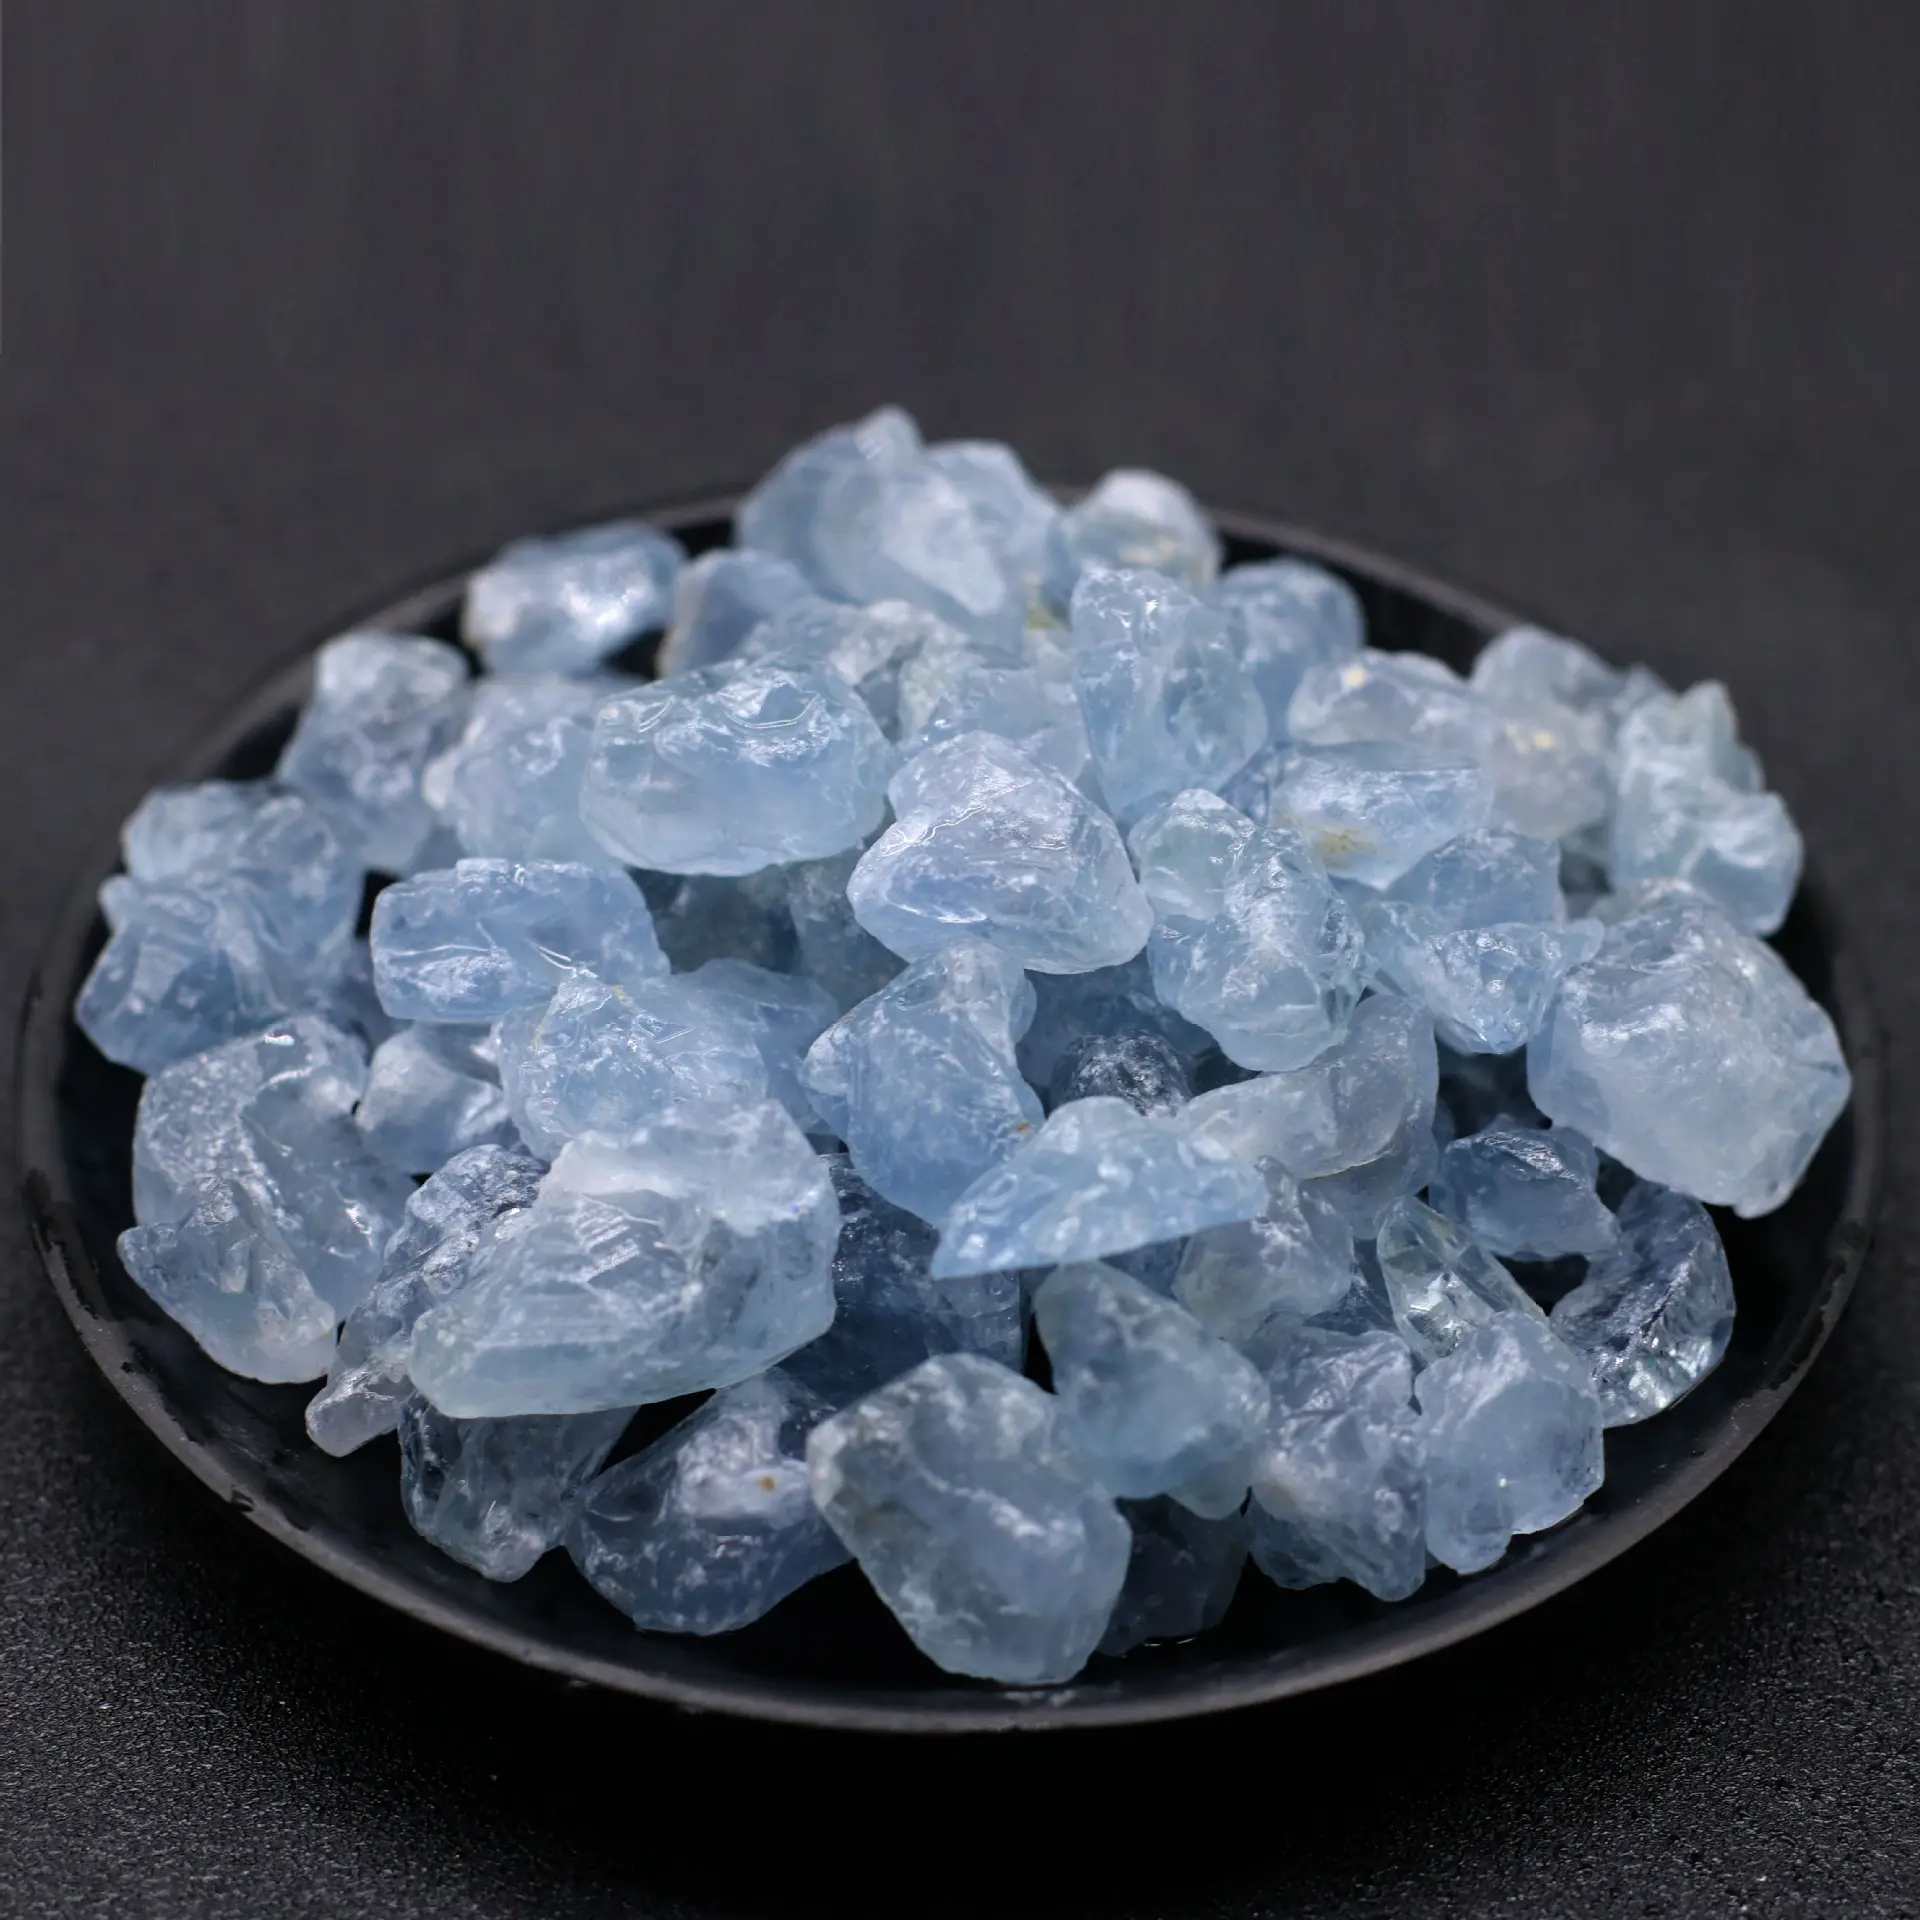 Hot Selling Natural Blue Crystal Celestite Raw Crushed Stone Aromatherapy Fragrant Stone For Decorative Handicrafts